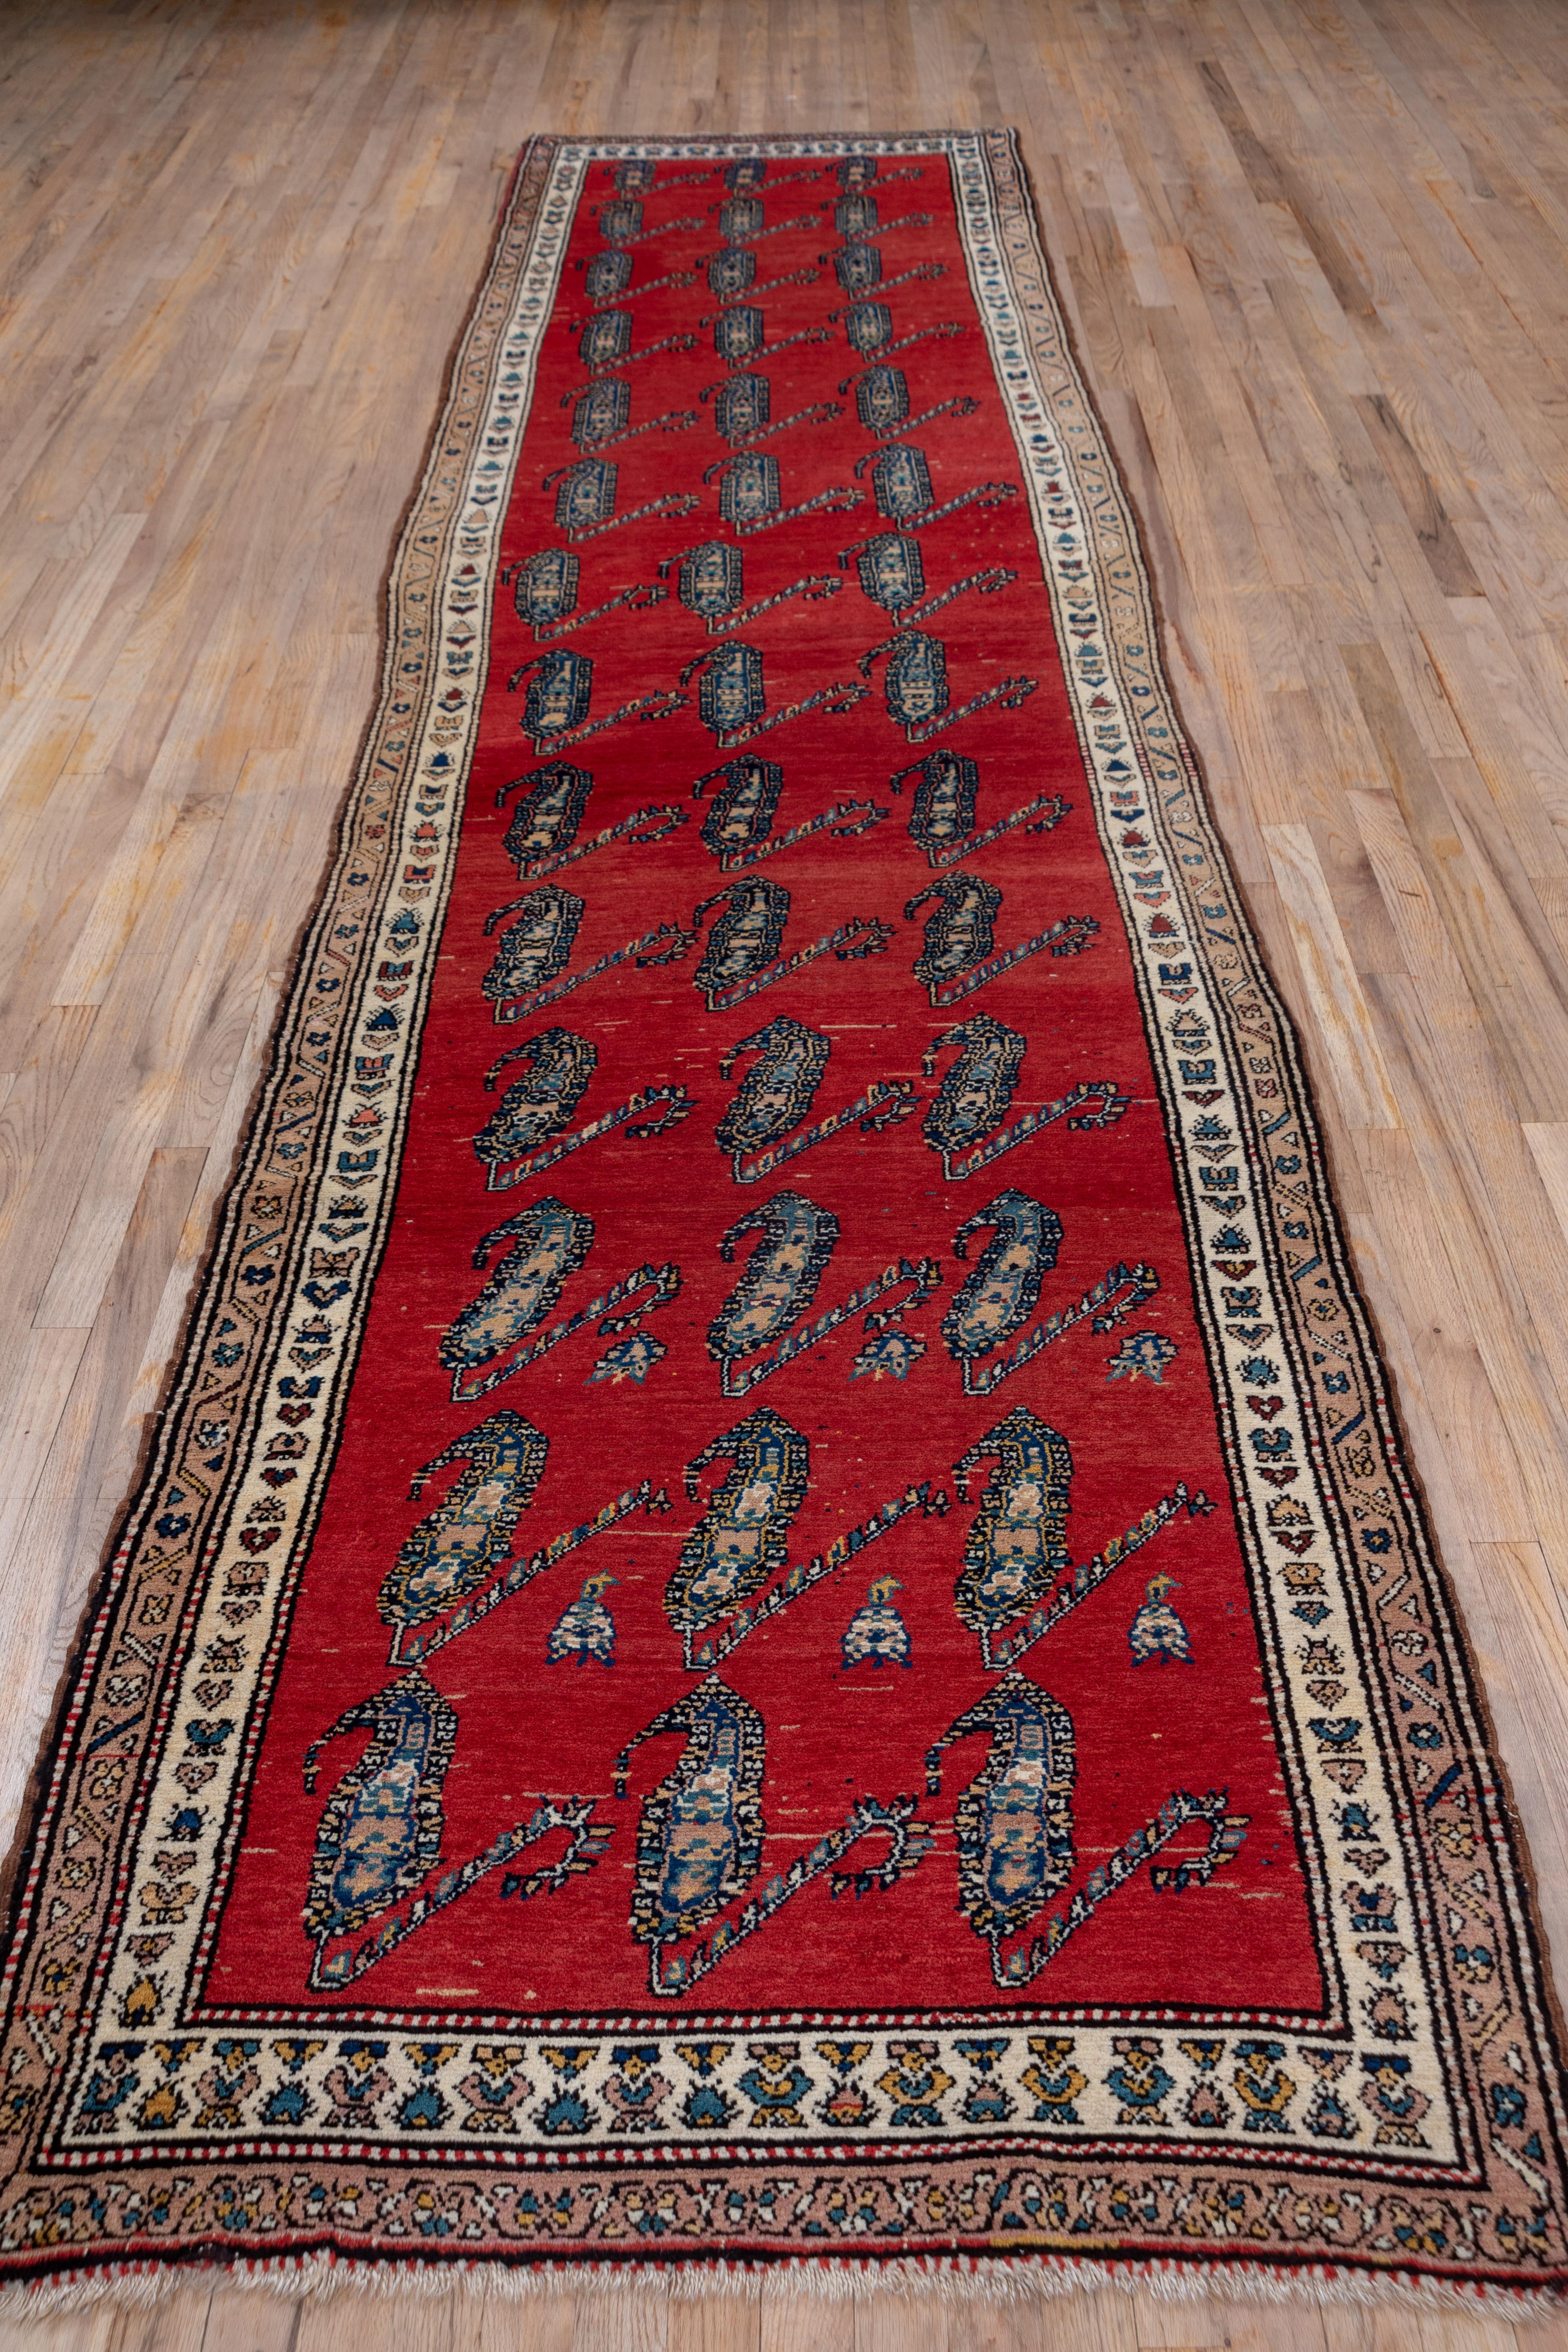 The brisk red field displays rows of slightly leaning slender floriated bottehs, three to a line in a clearly textile-derived pattern. The cream main border of this attractive west Persian rustic runner shows a variety of stylized flowers, birds,